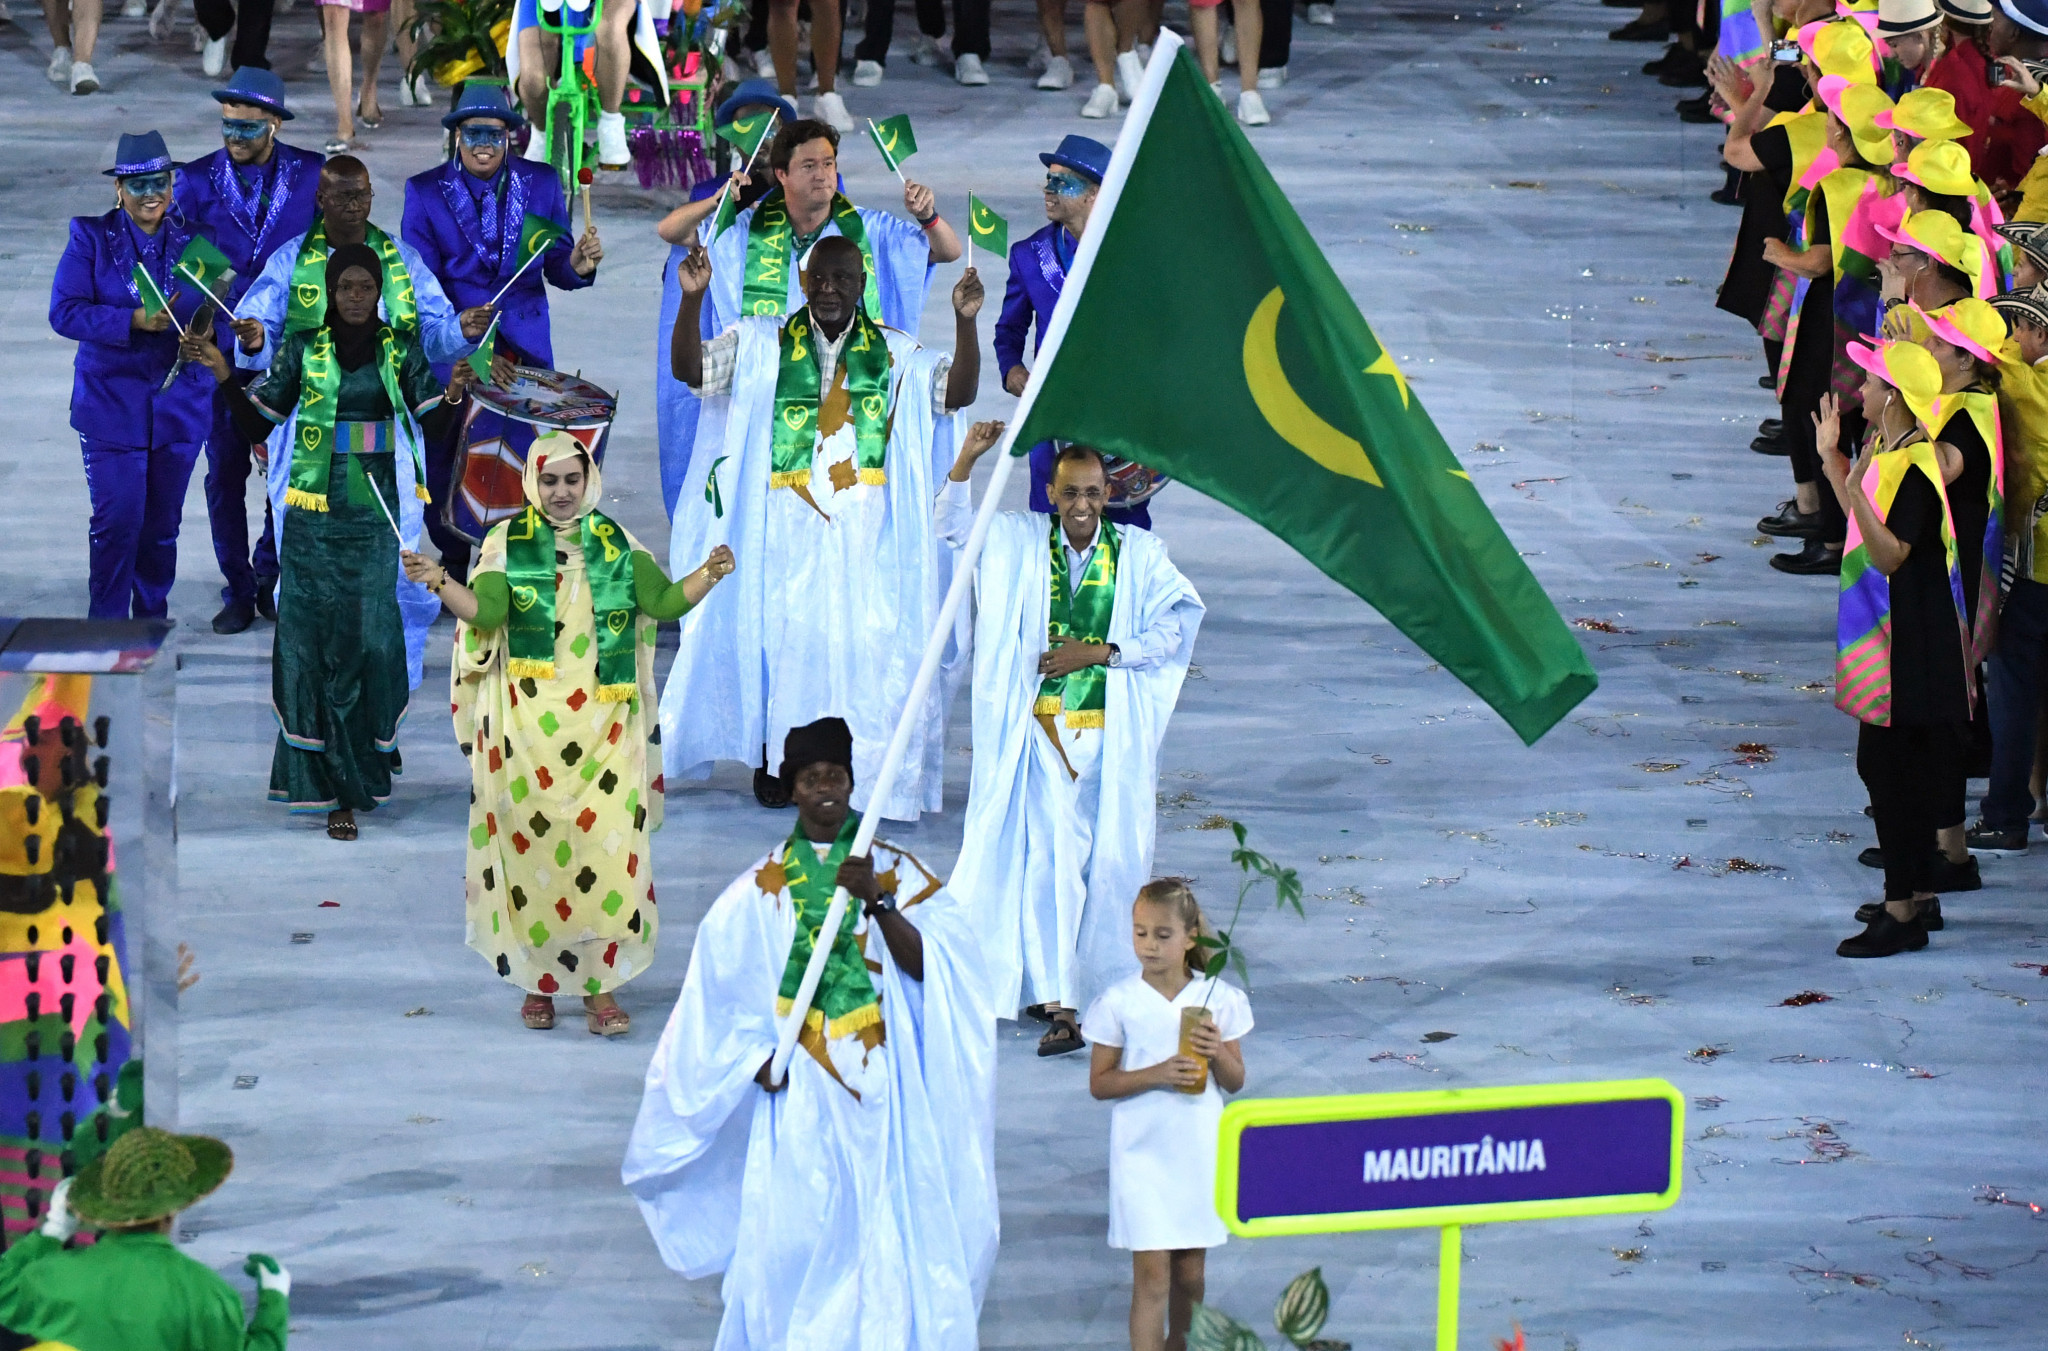 Mauritania has competed at every Summer Olympics since Los Angeles 1984 ©Getty Images